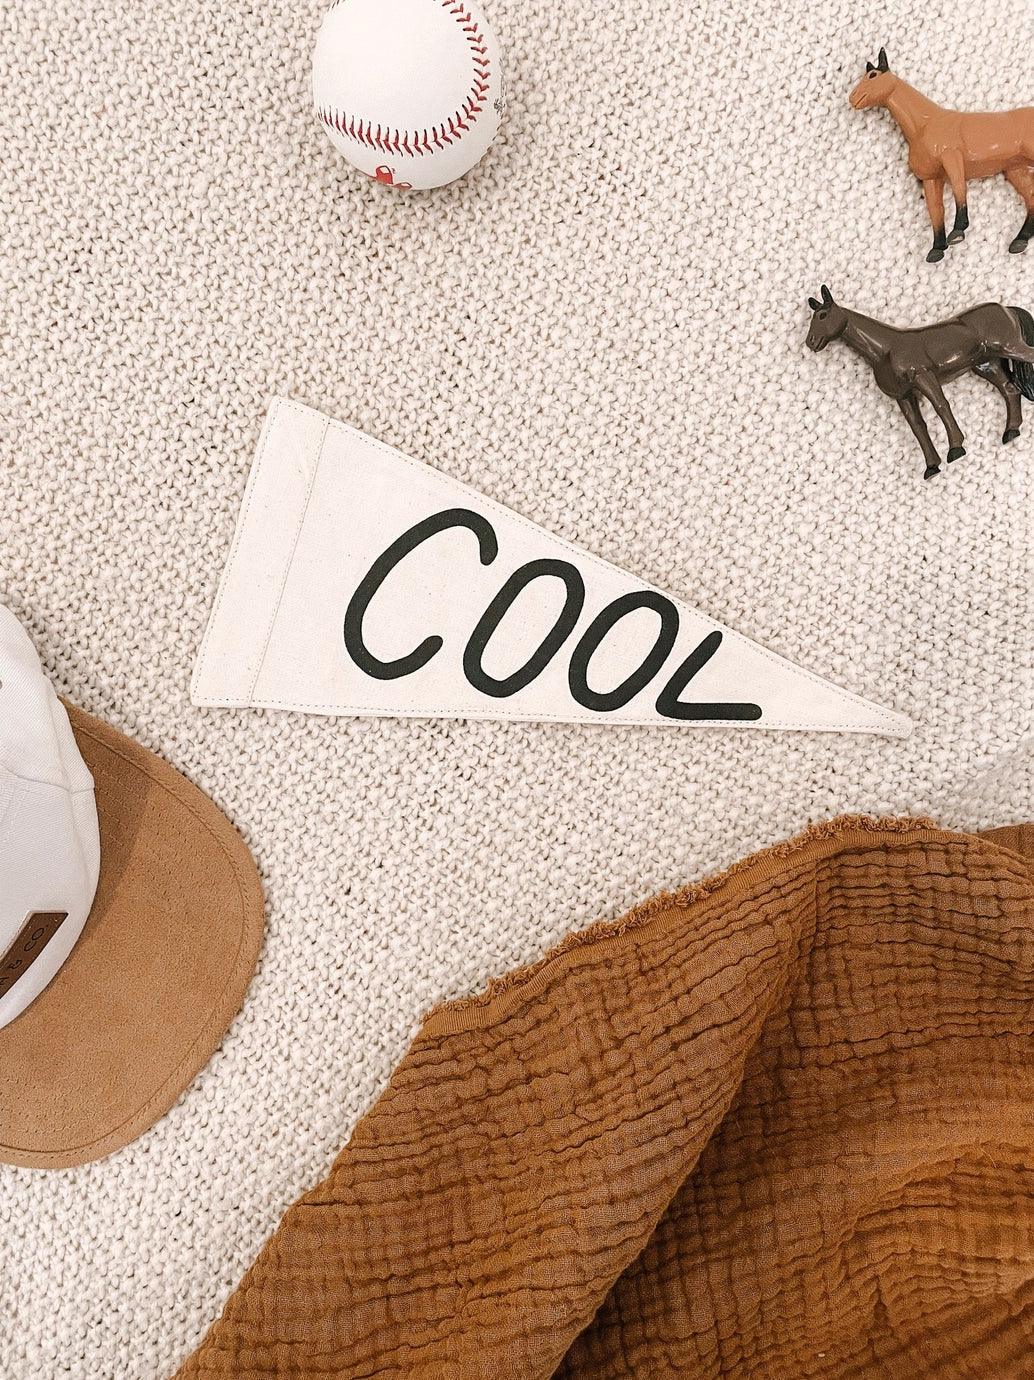 Imani Collective, Cool Pennant - Hello Little Birdie